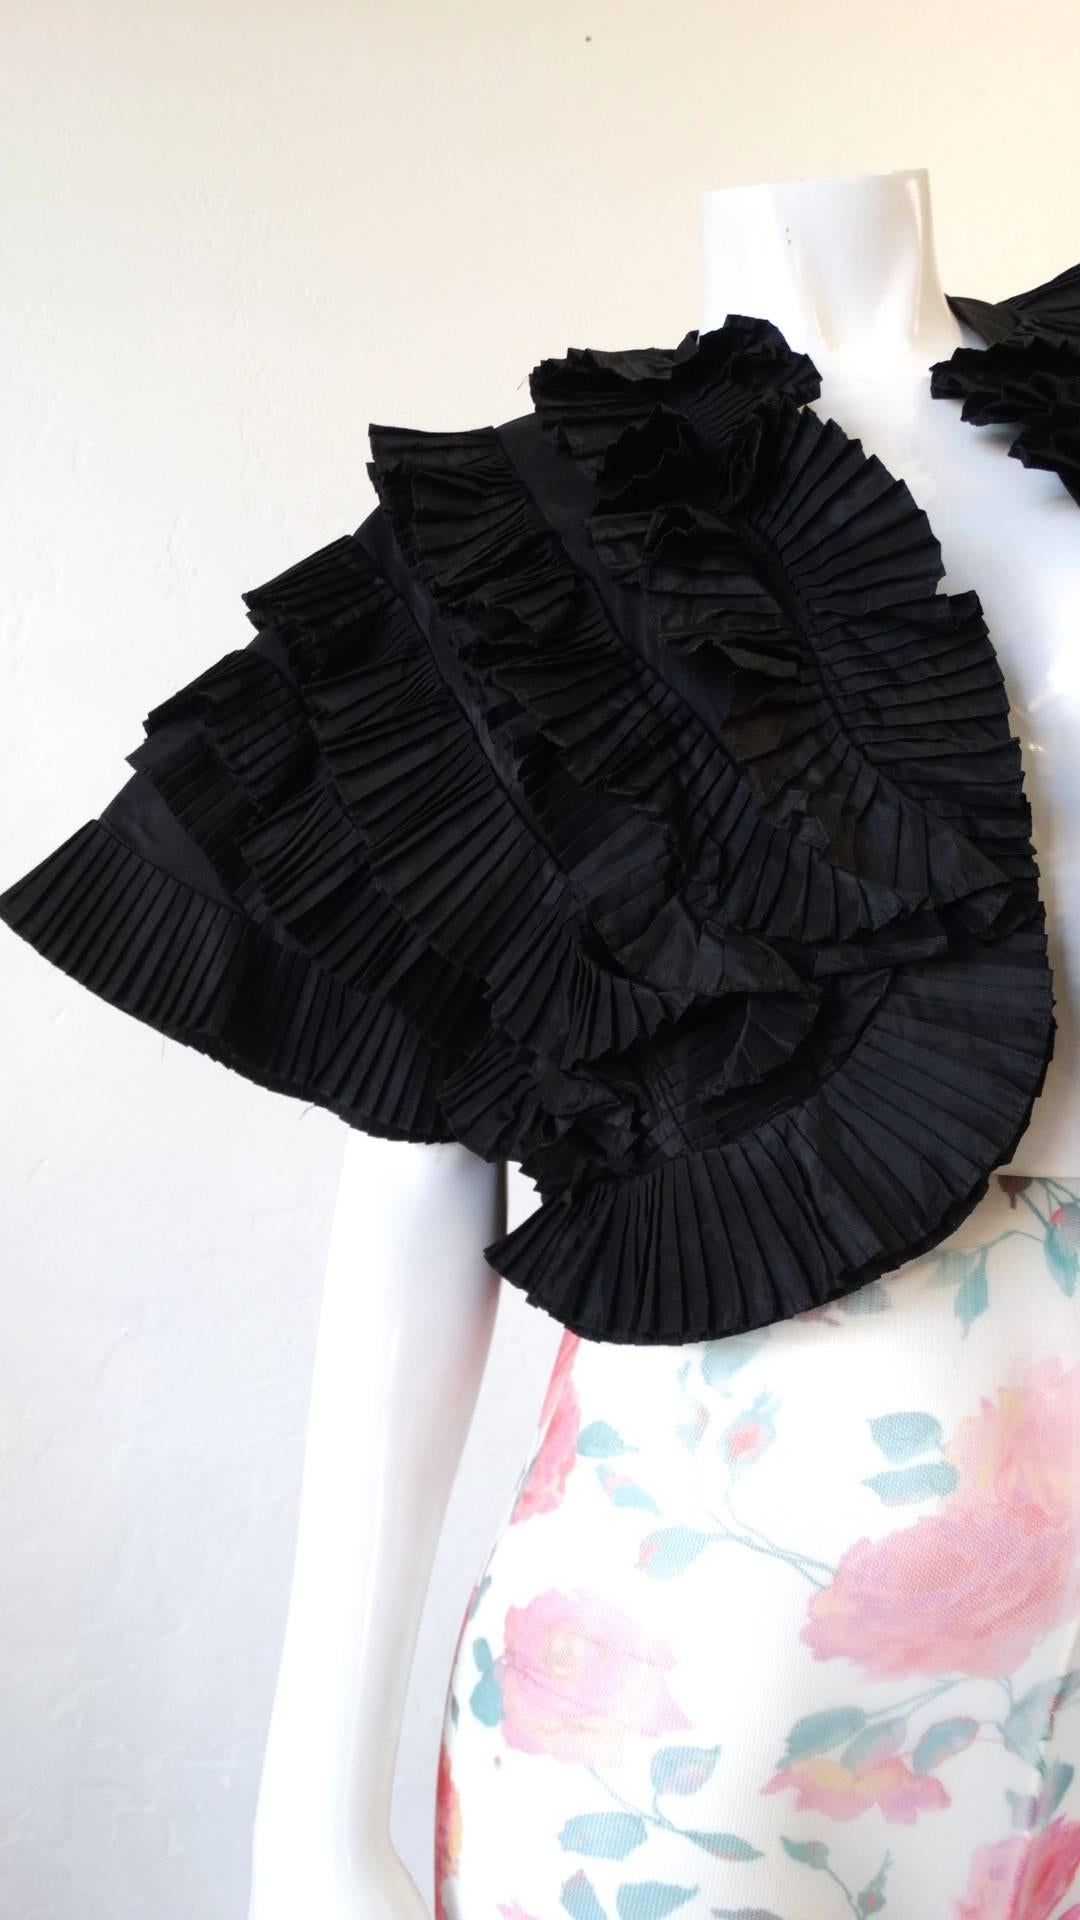 1980s fan pleat bolero jacket from vintage label Richilene New York! Unique pleated construction arranged in a fan-like structure. Short sleeves that wing out at the shoulders. Bolero style fit, wears open. 

This Jacket measures 17